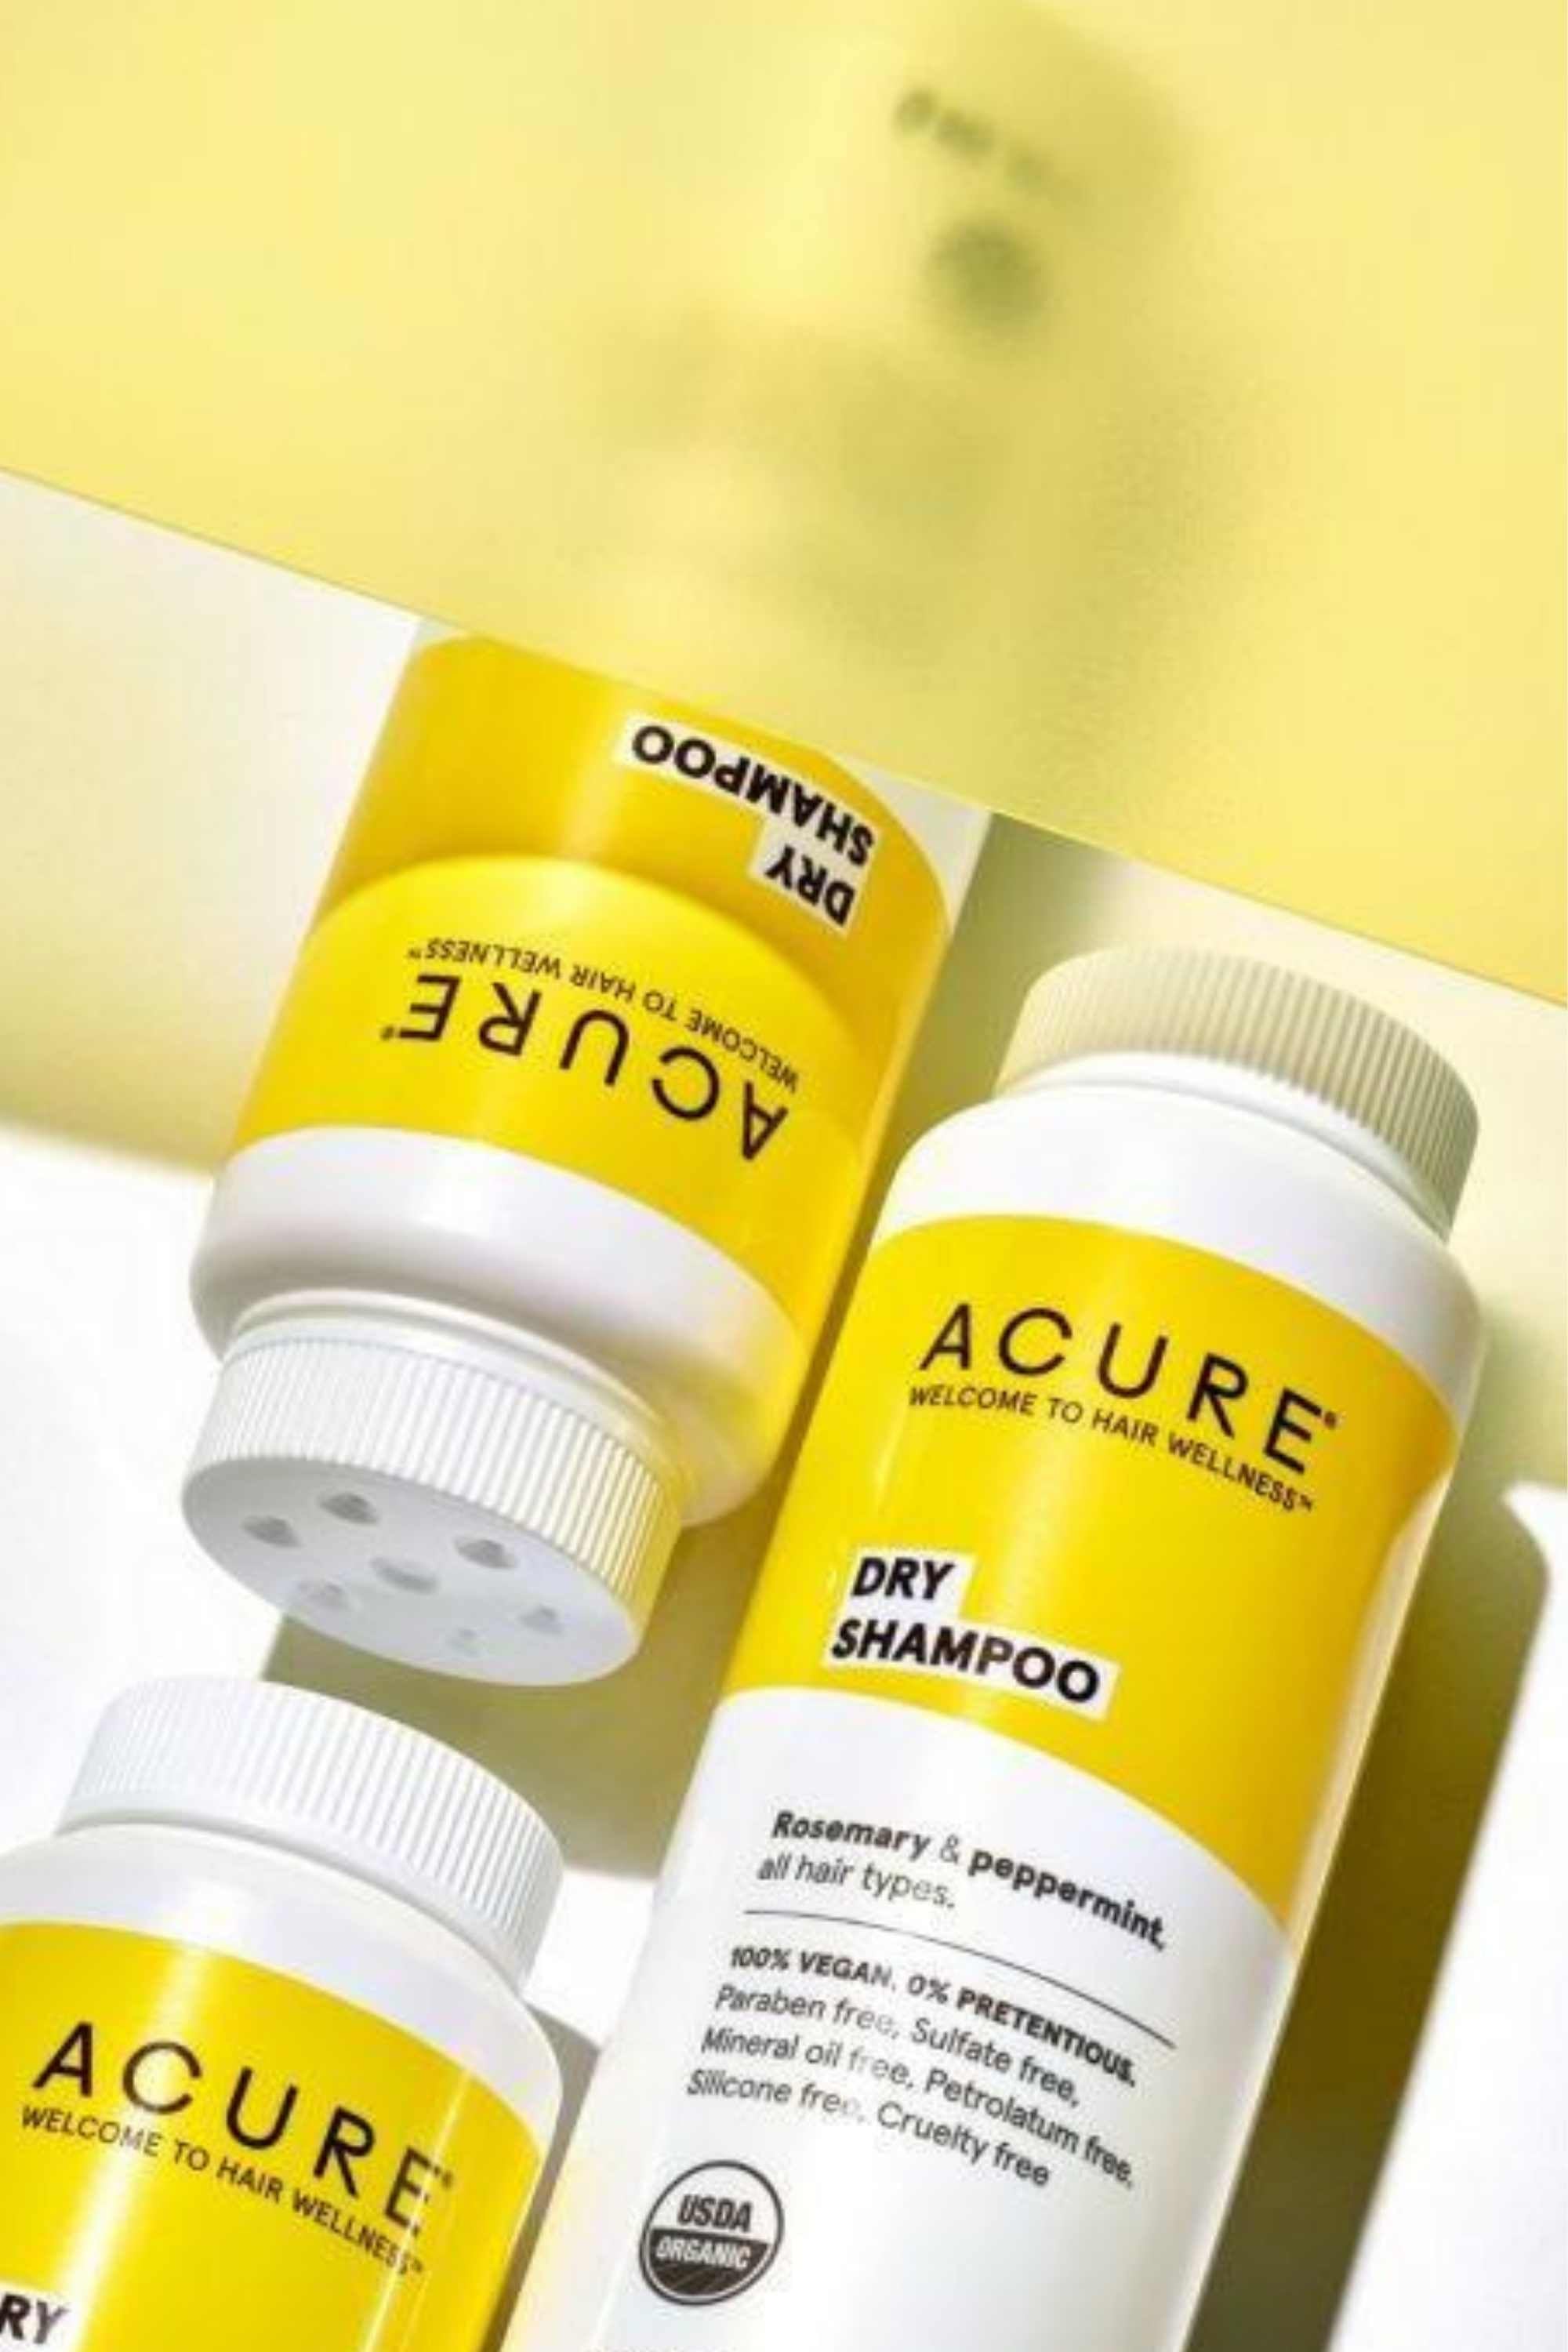 Acure - Dry Shampoo - 48g (2 types)